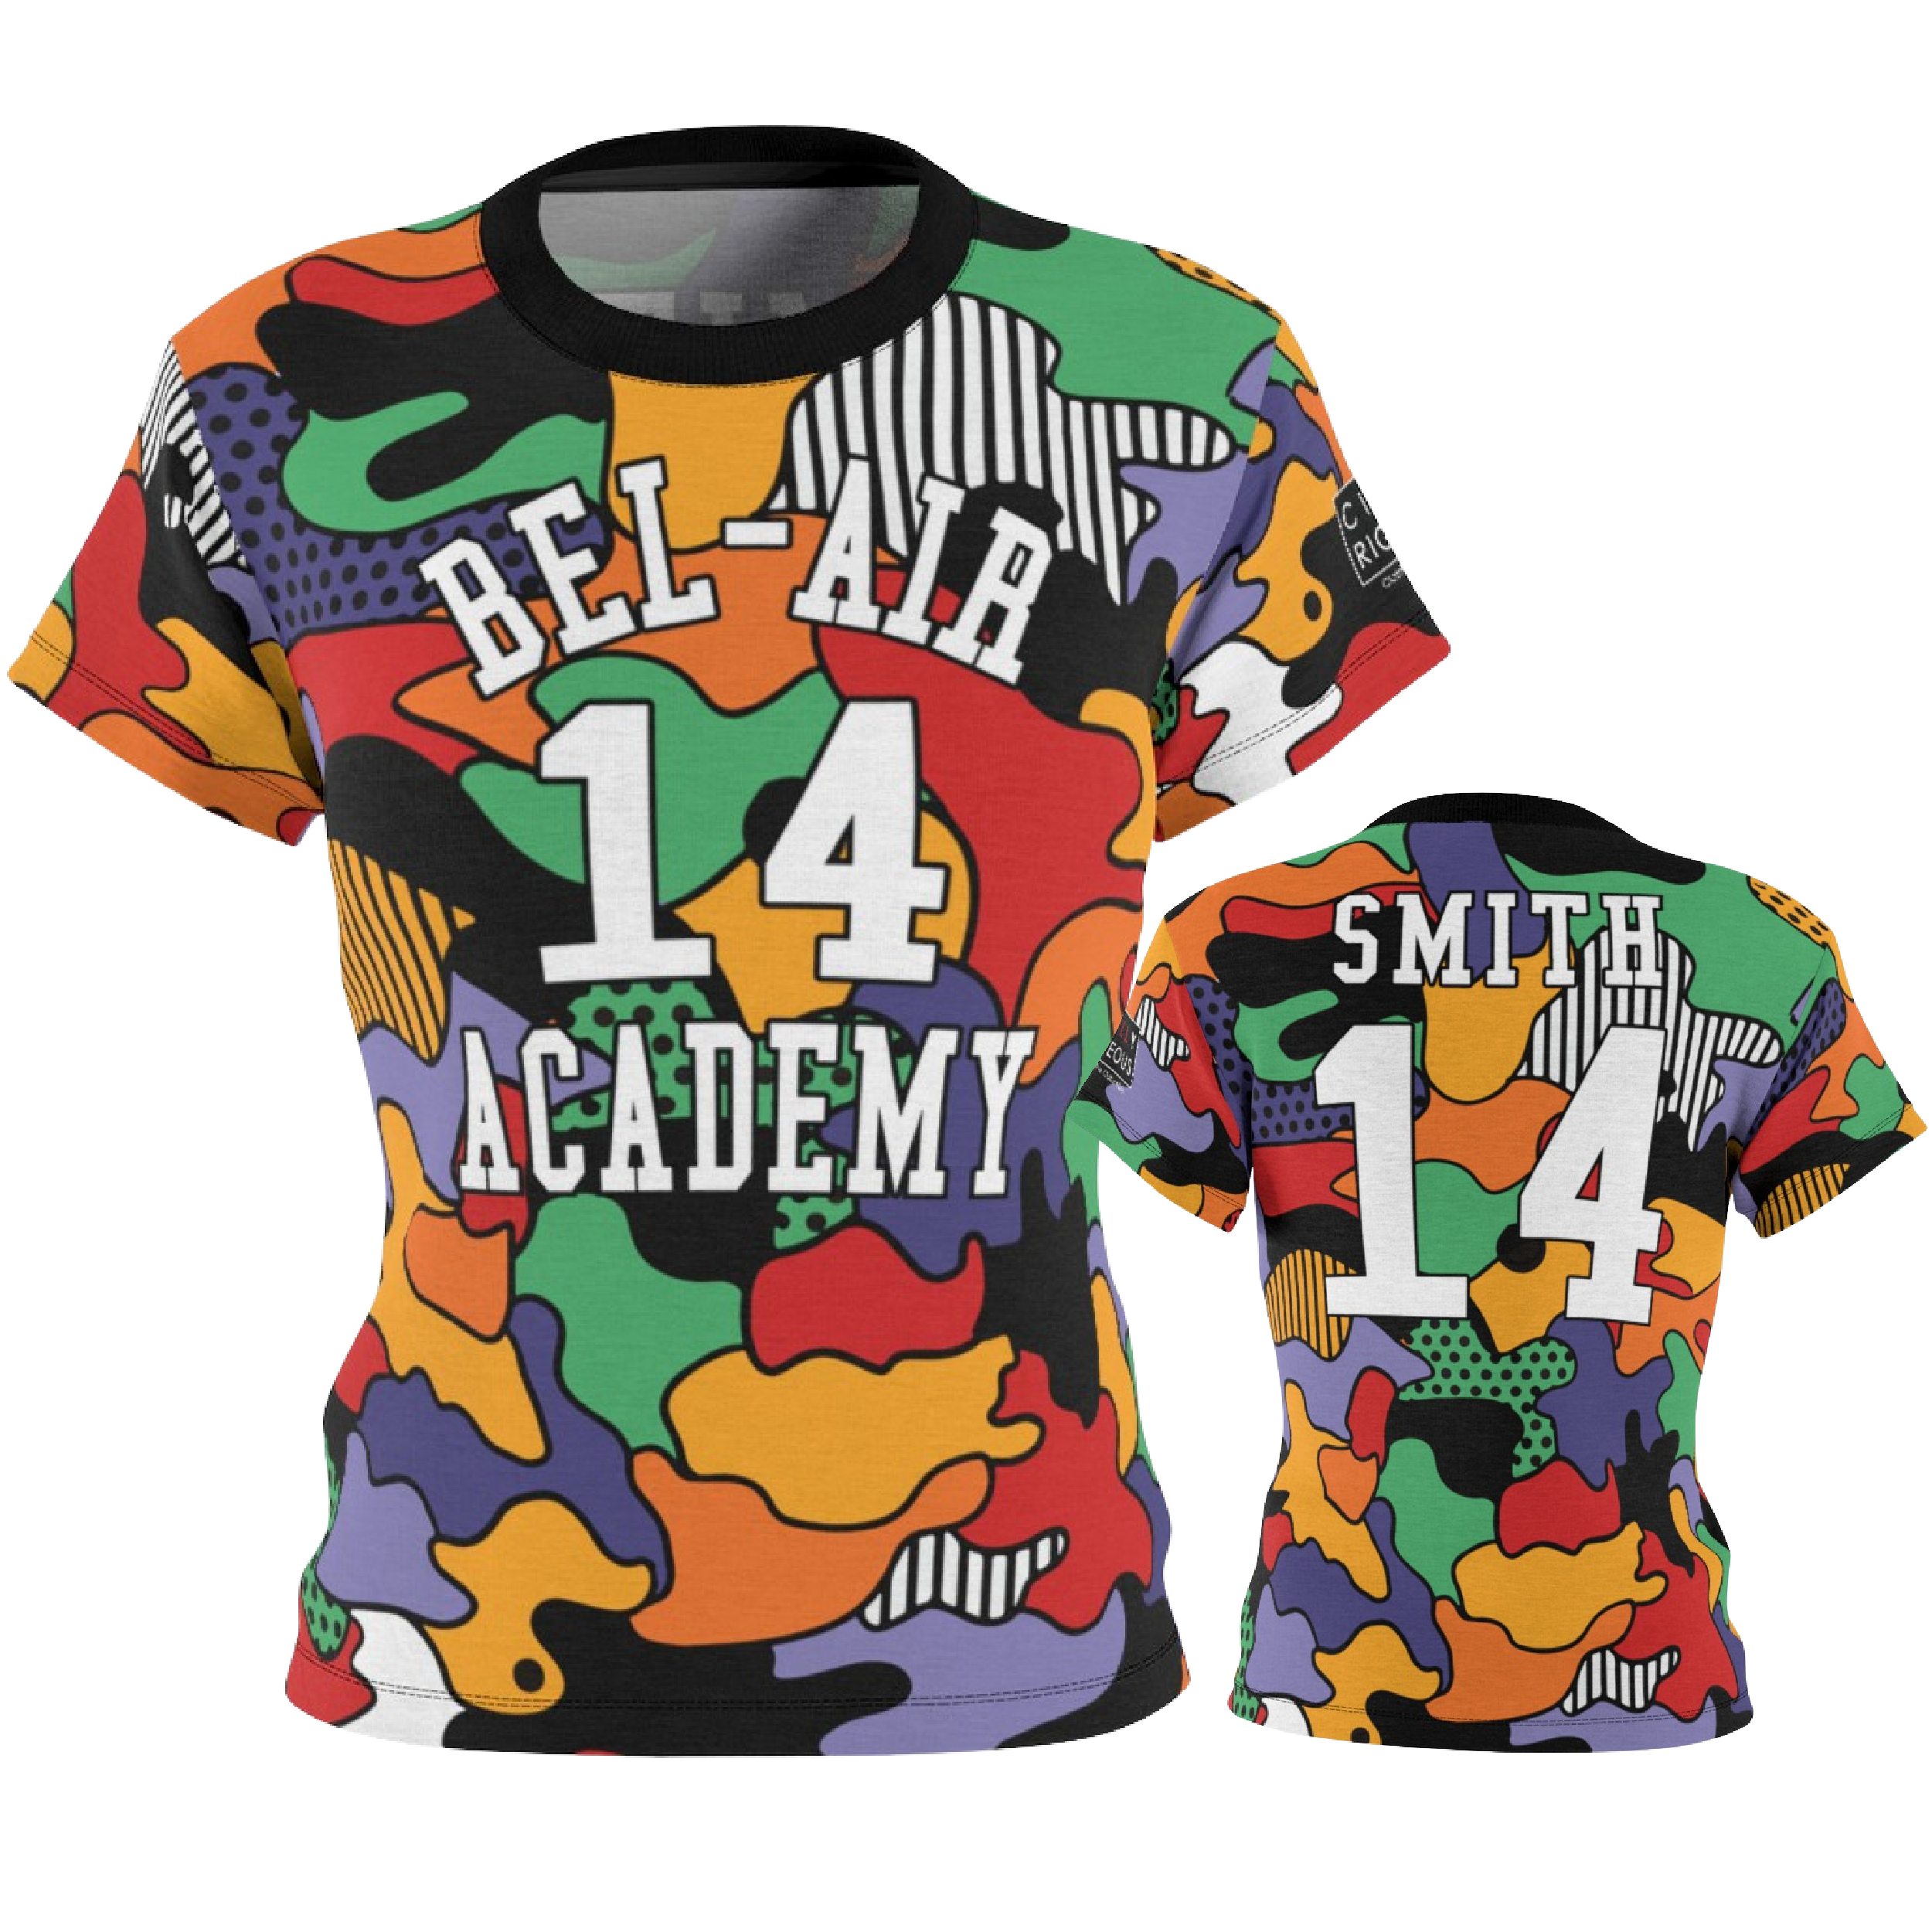 Bel Air Academy Jersey - The Fresh Prince | Visibly Black 2XL